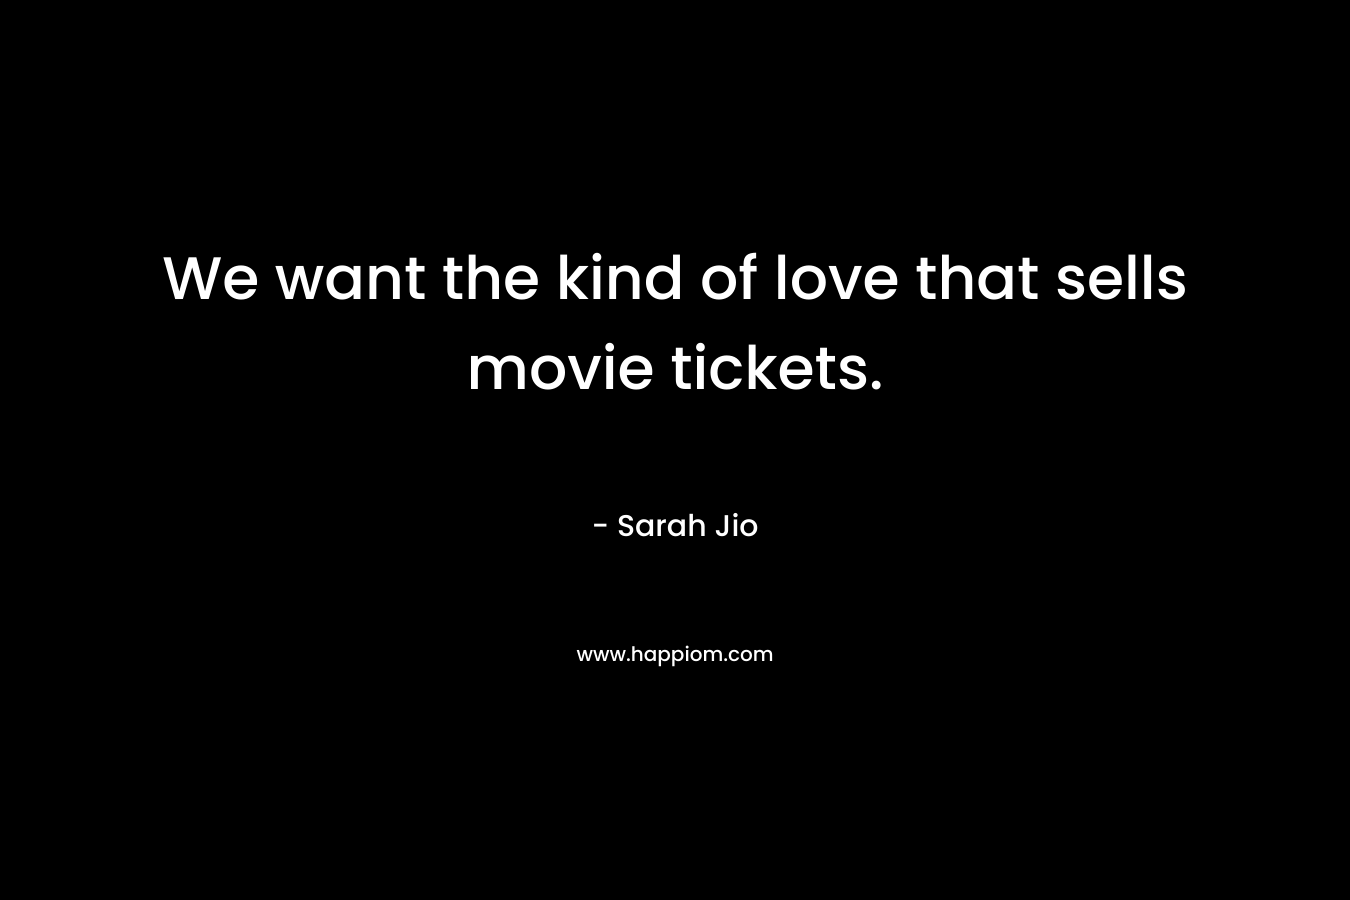 We want the kind of love that sells movie tickets.